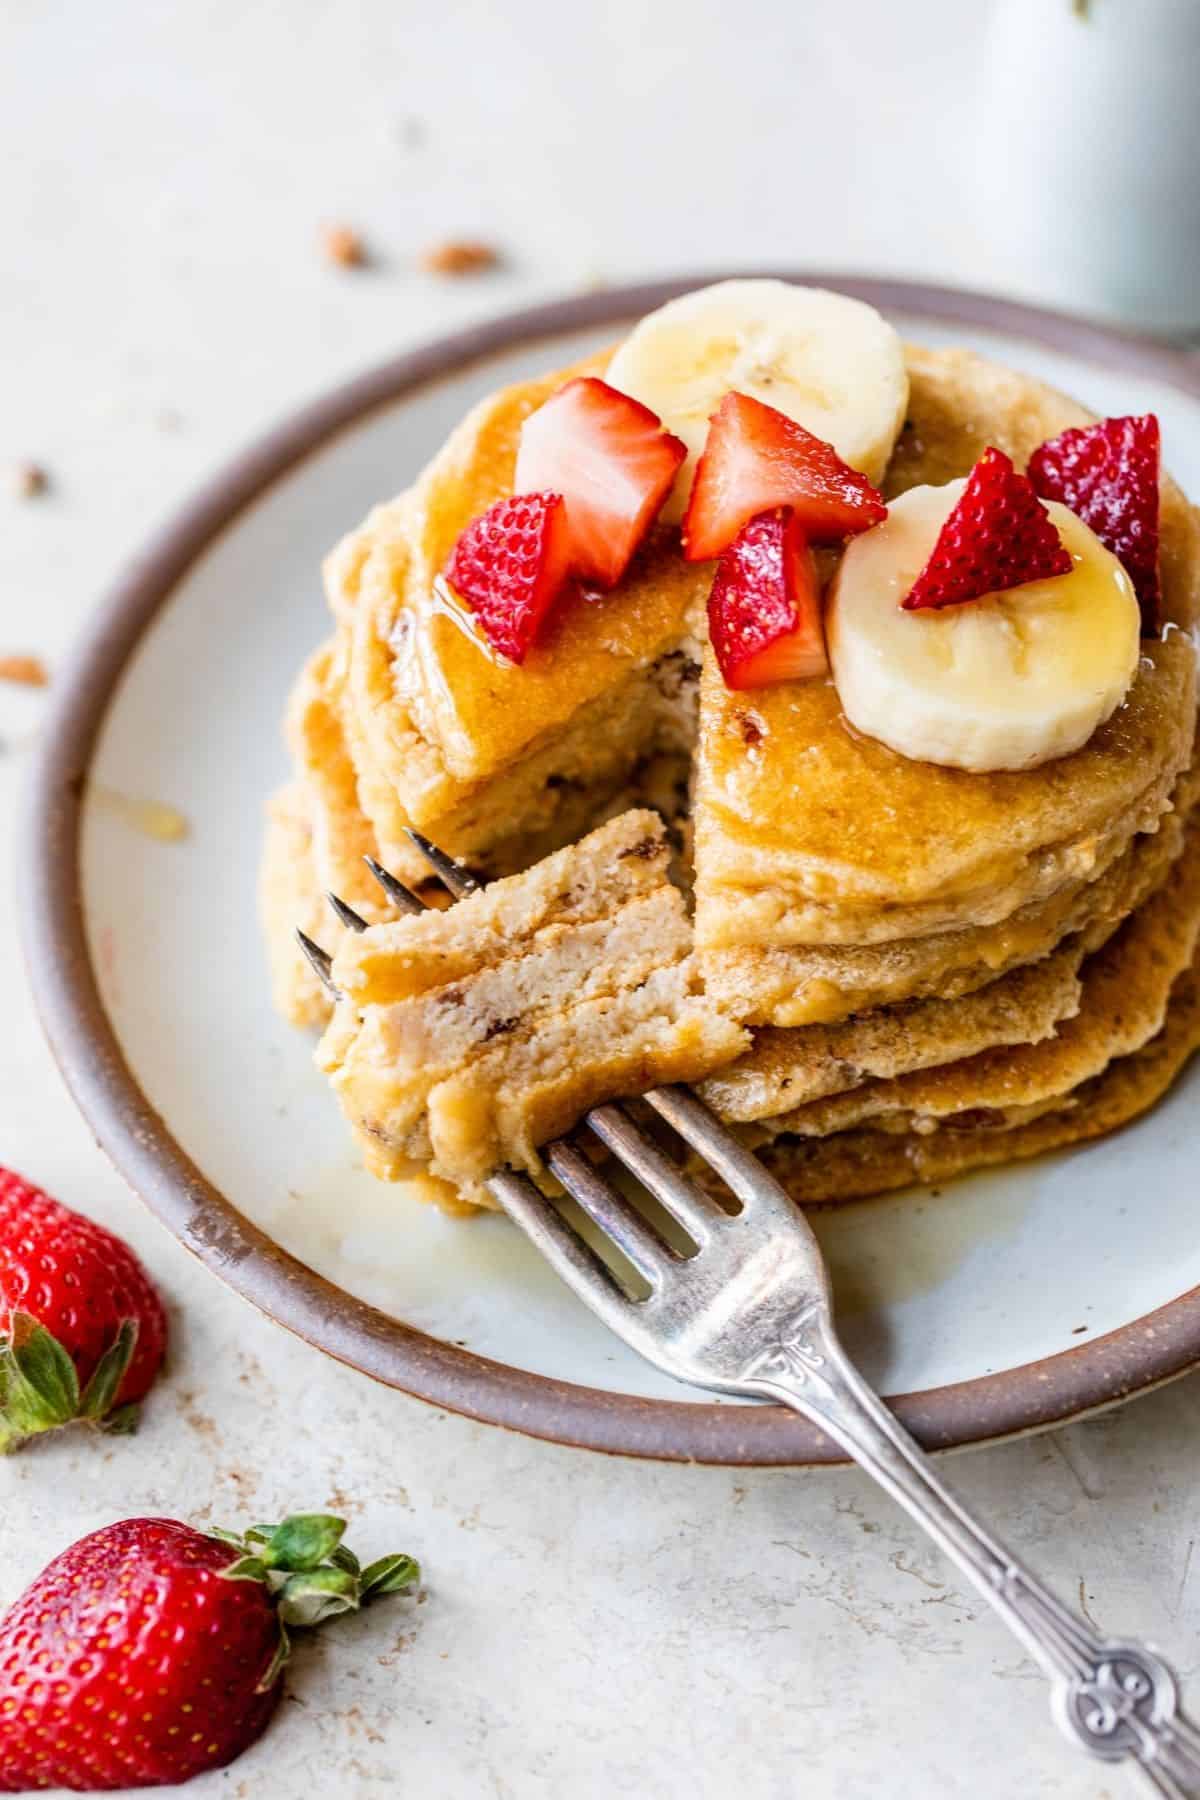 coconut flour pancakes topped with strawberries and banana slices